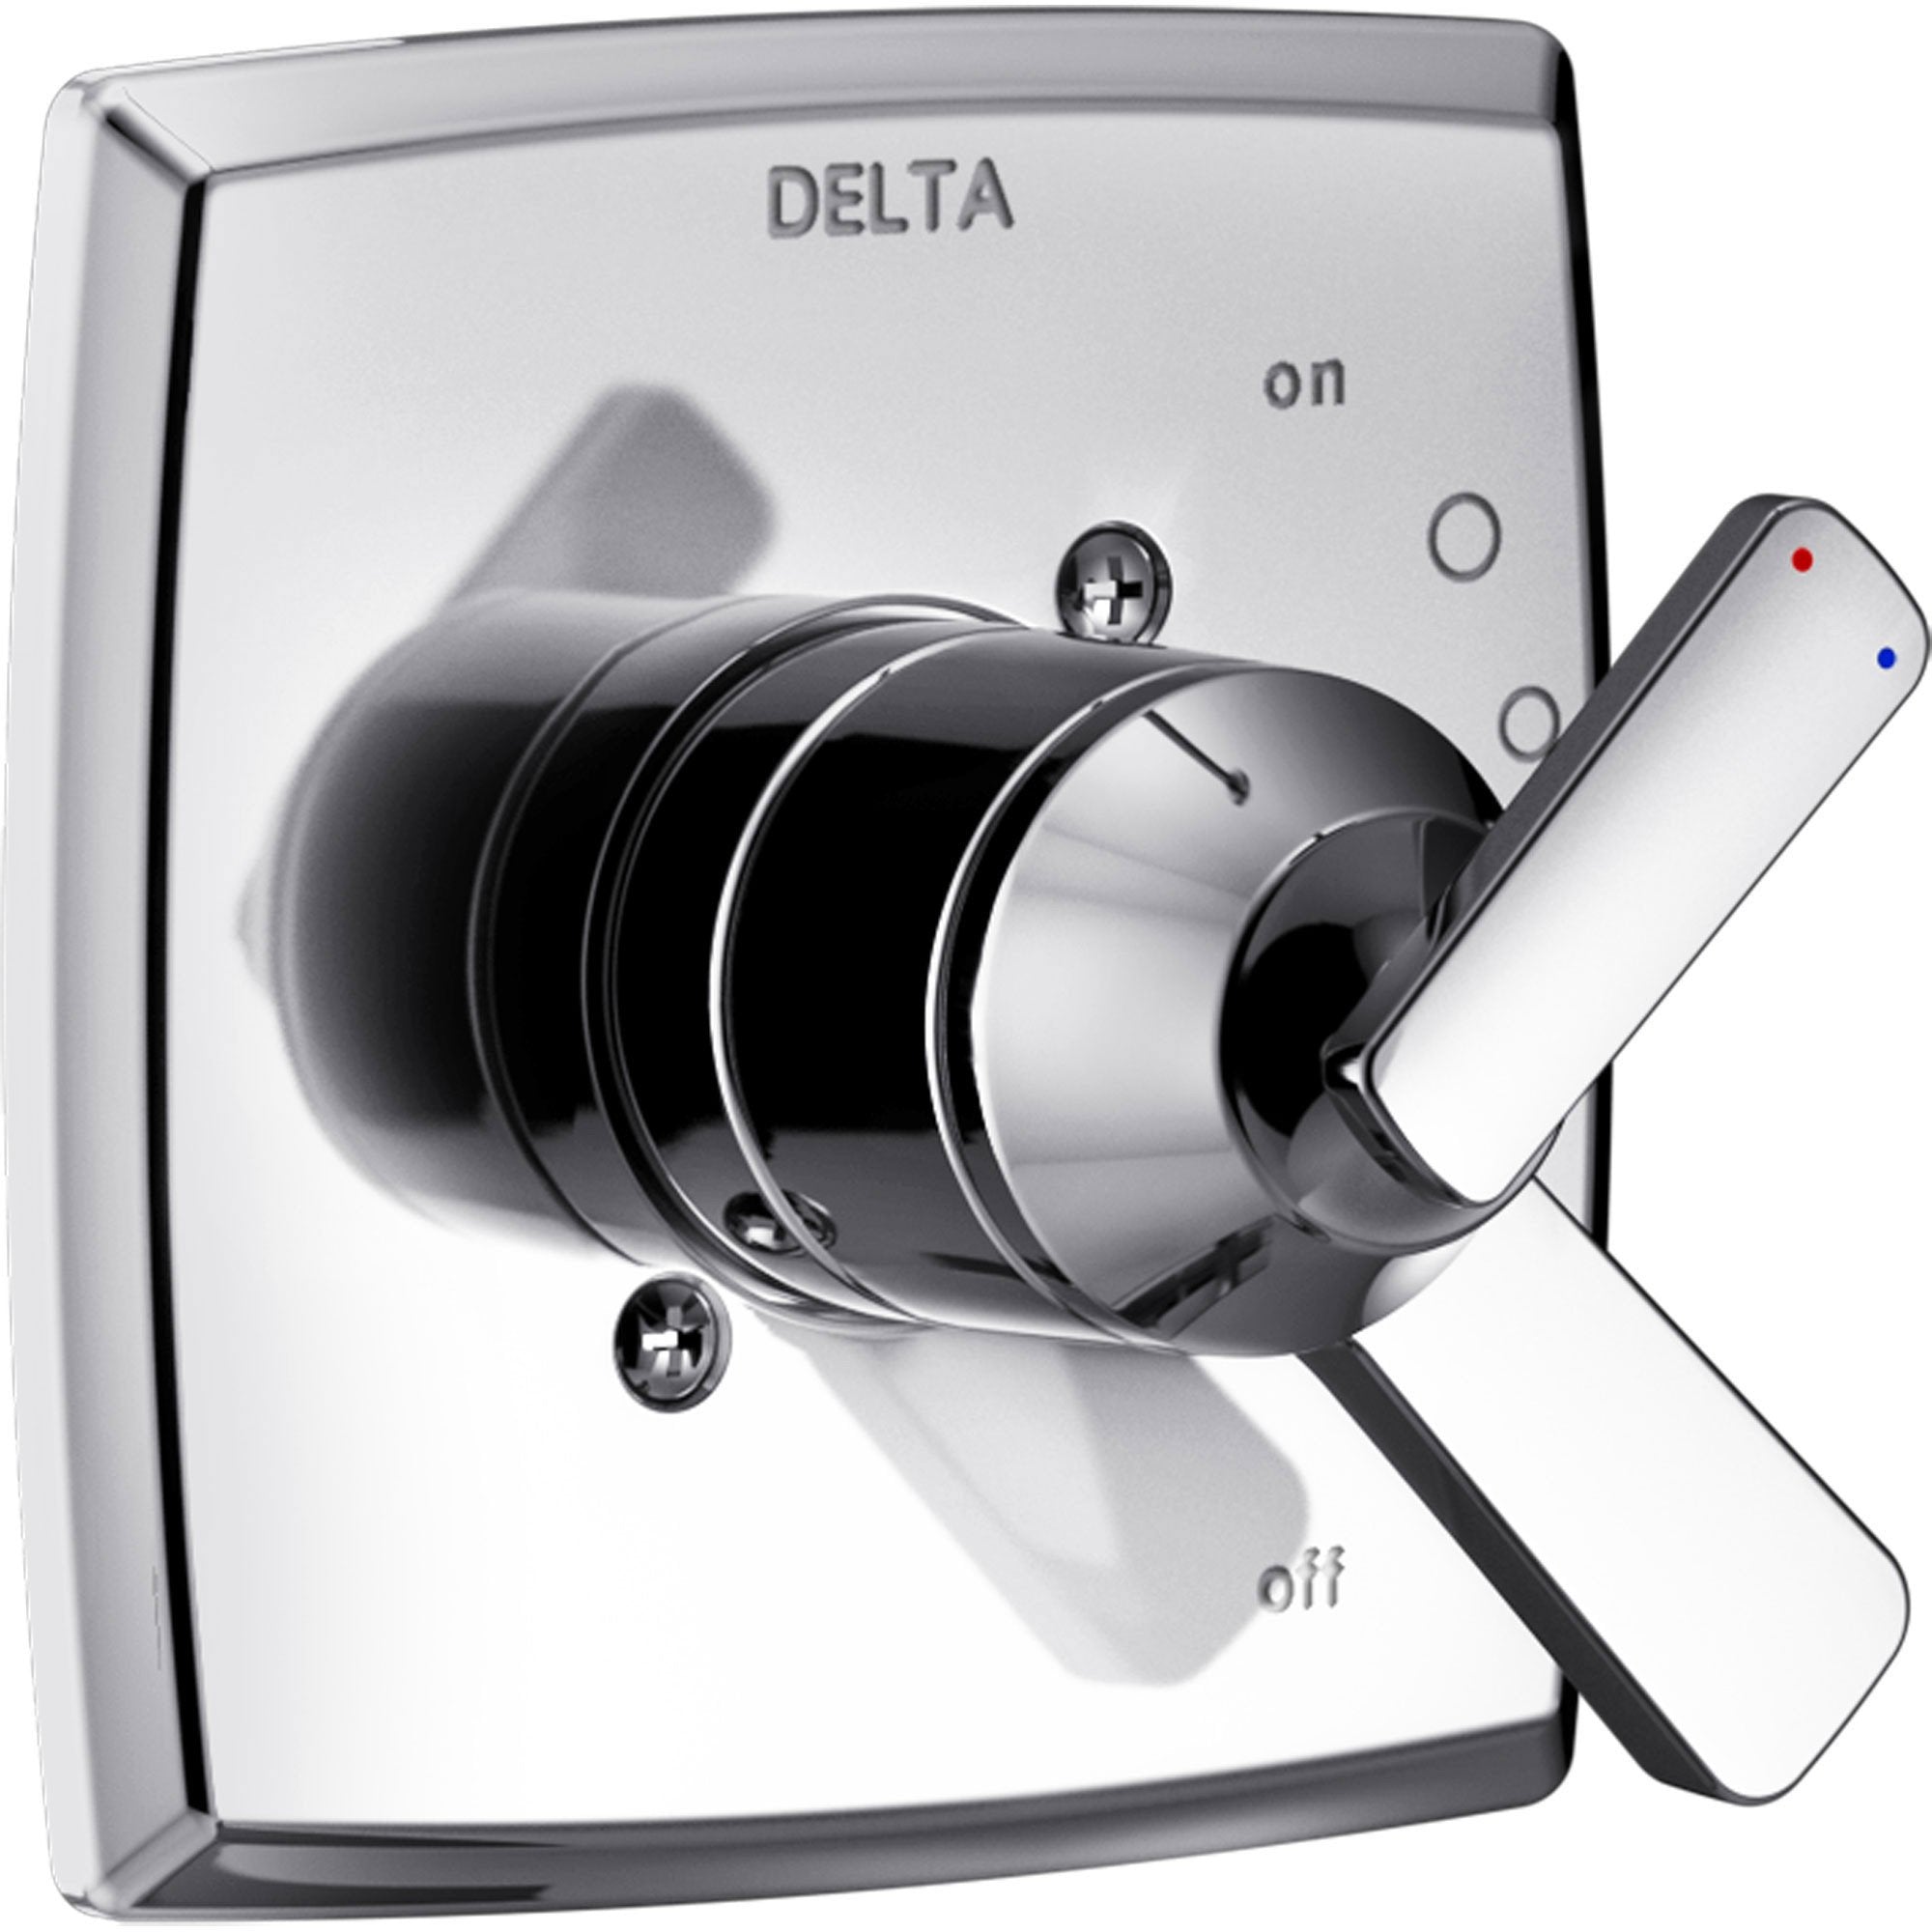 Delta Ashlyn Modern Chrome Finish 17 Series Dual Temperature and Pressure Shower Faucet Control INCLUDES Rough-in Valve D1156V